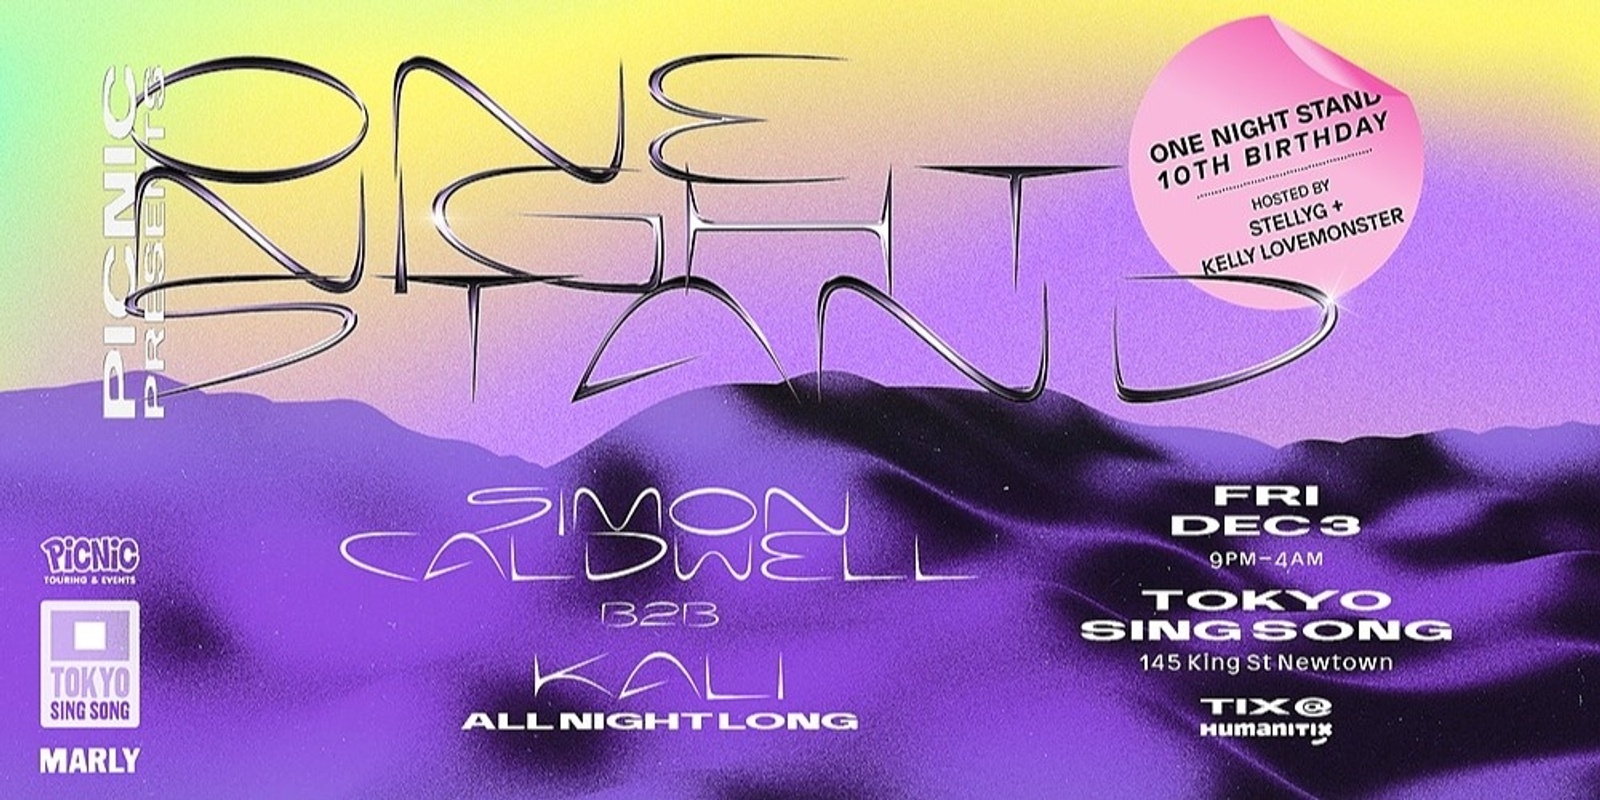 Banner image for Picnic One Night Stand| Simon Caldwell b2b Kali | Hosted by STELLYG + Kelly Lovemonster 